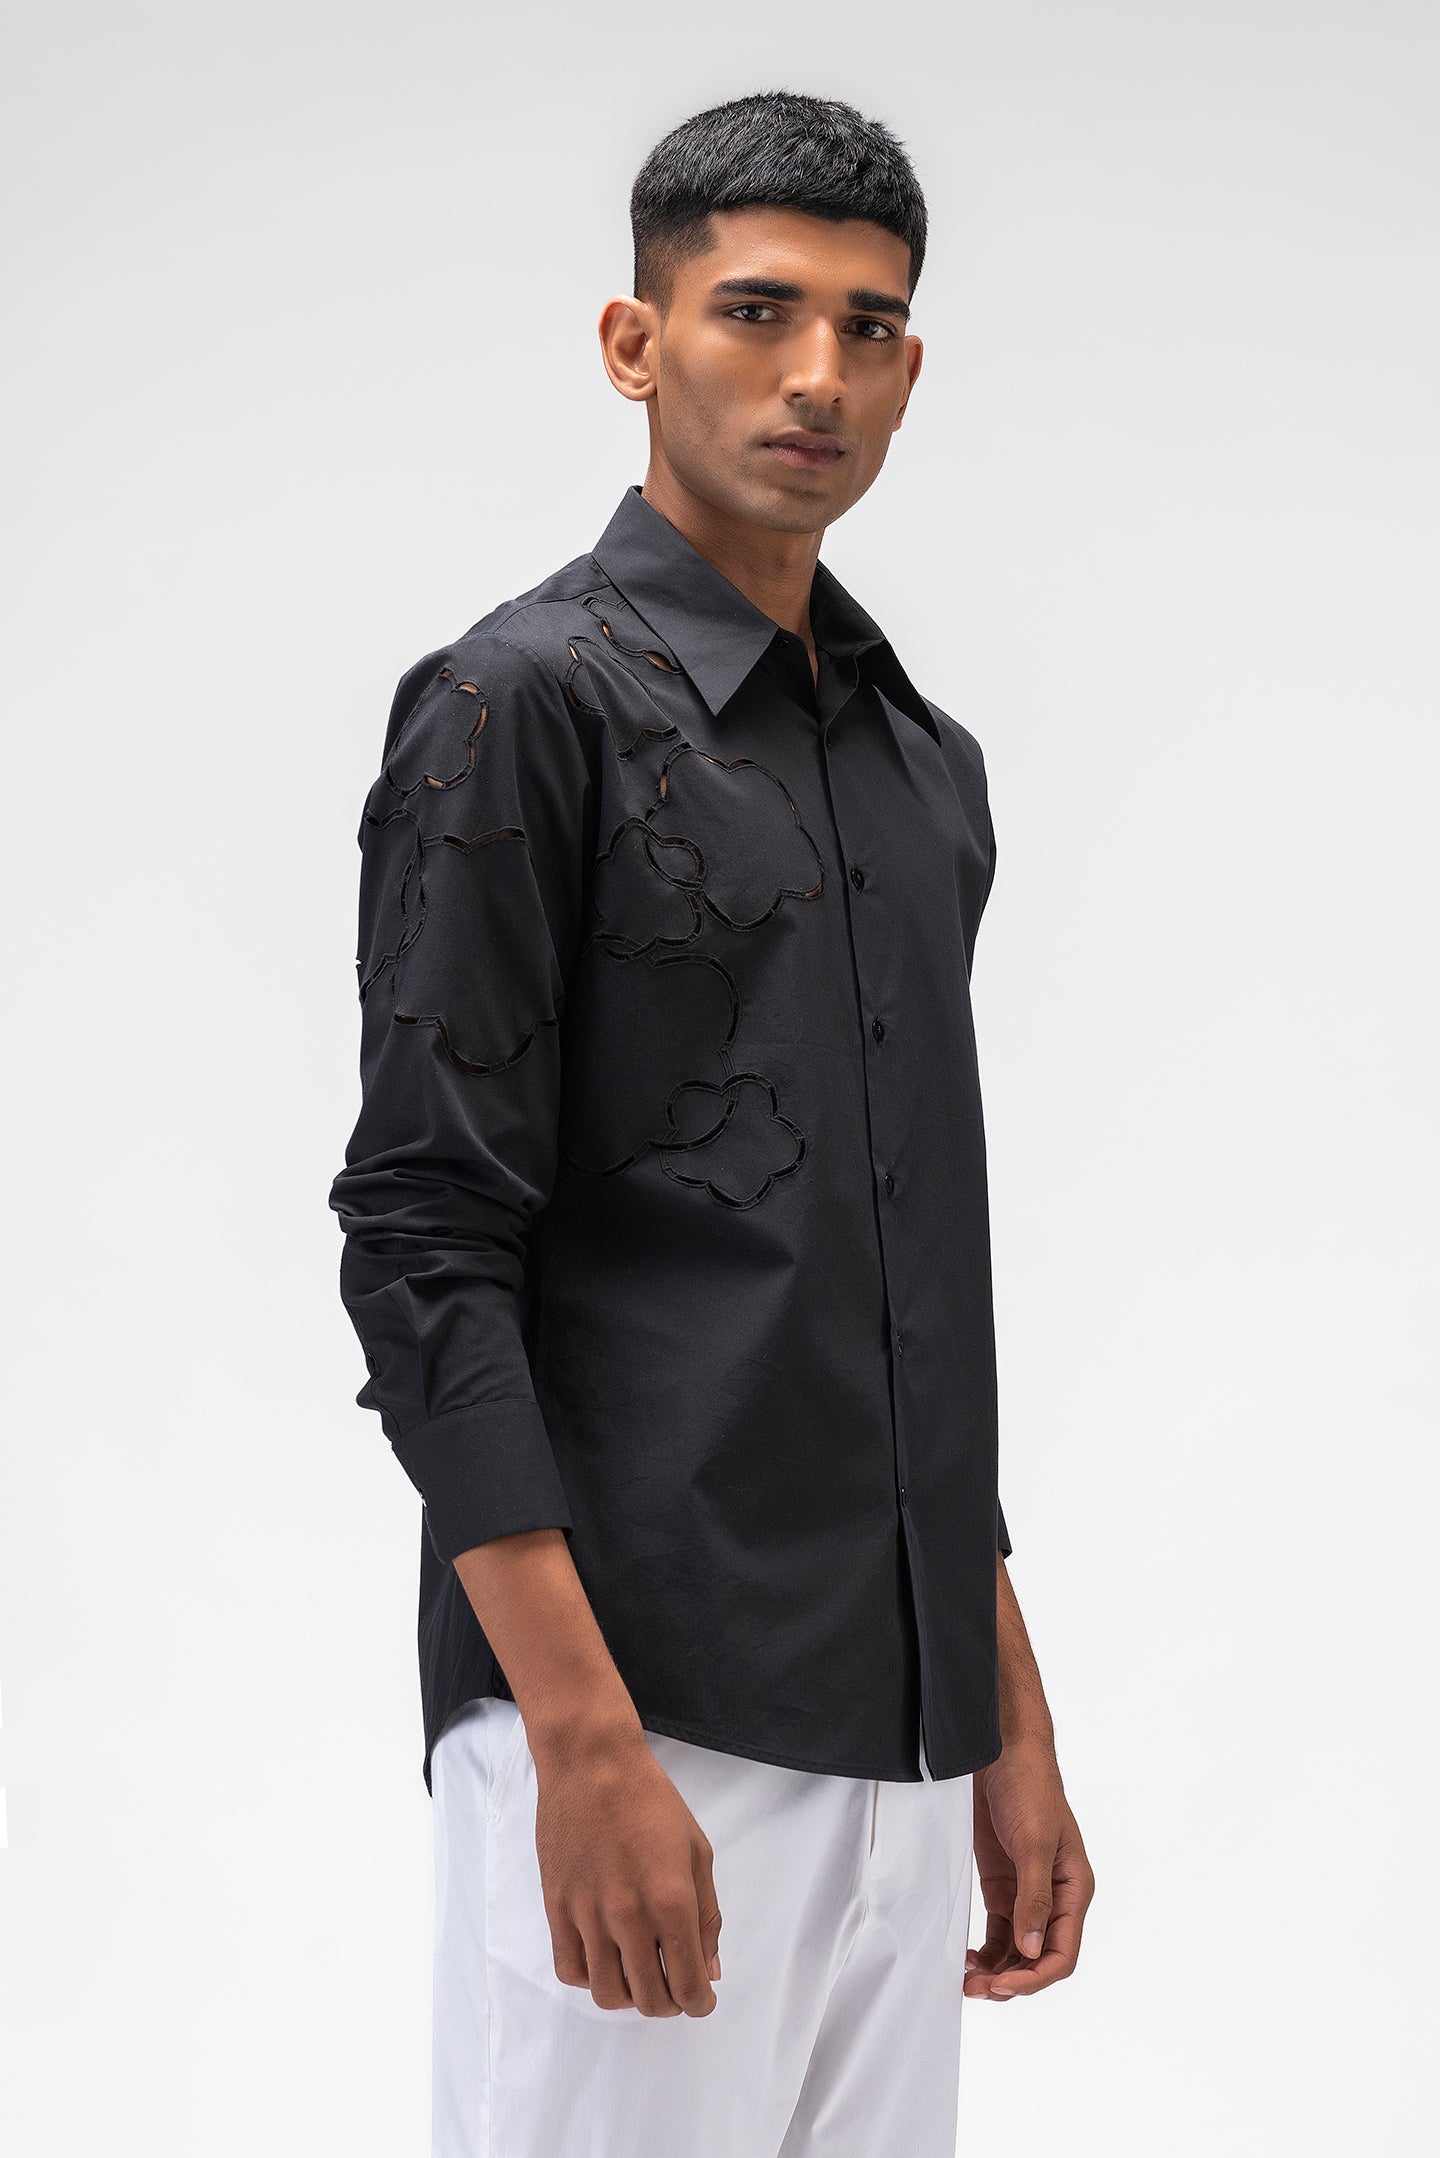 Mens Shirt With Cutout Embroidery